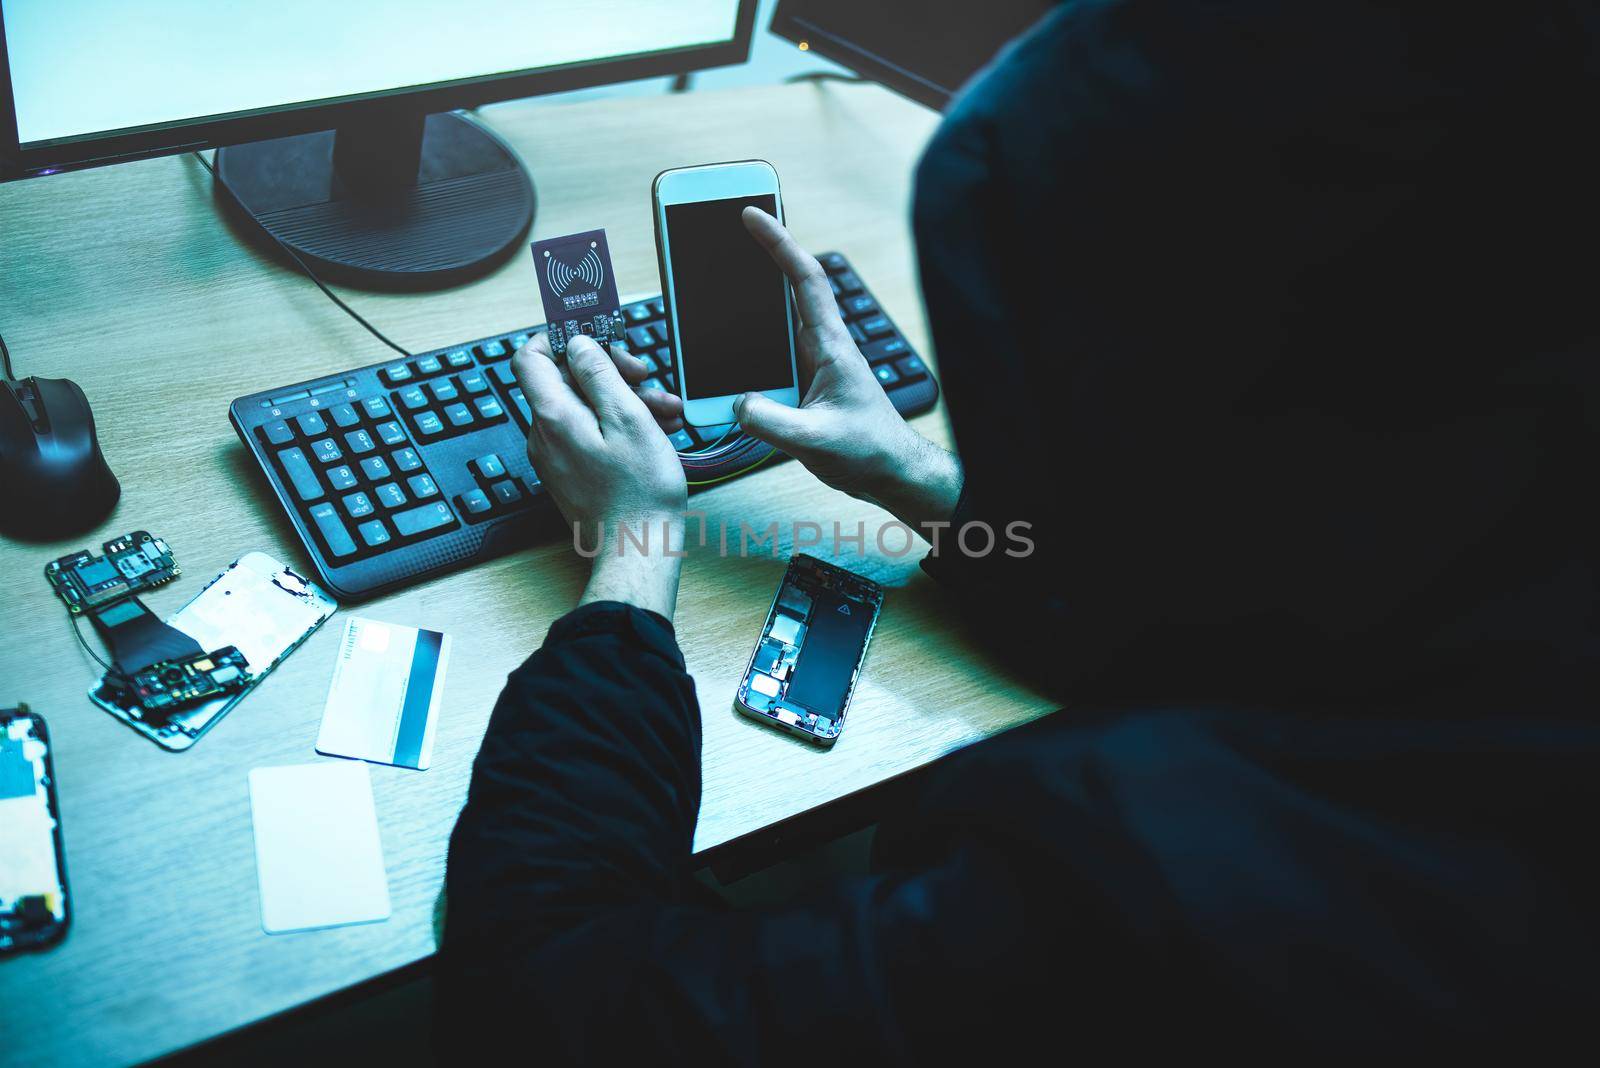 Male hacker is trying to access the phone. Security and protection of personal data. The concept of cyber crime and hacking electronic devices